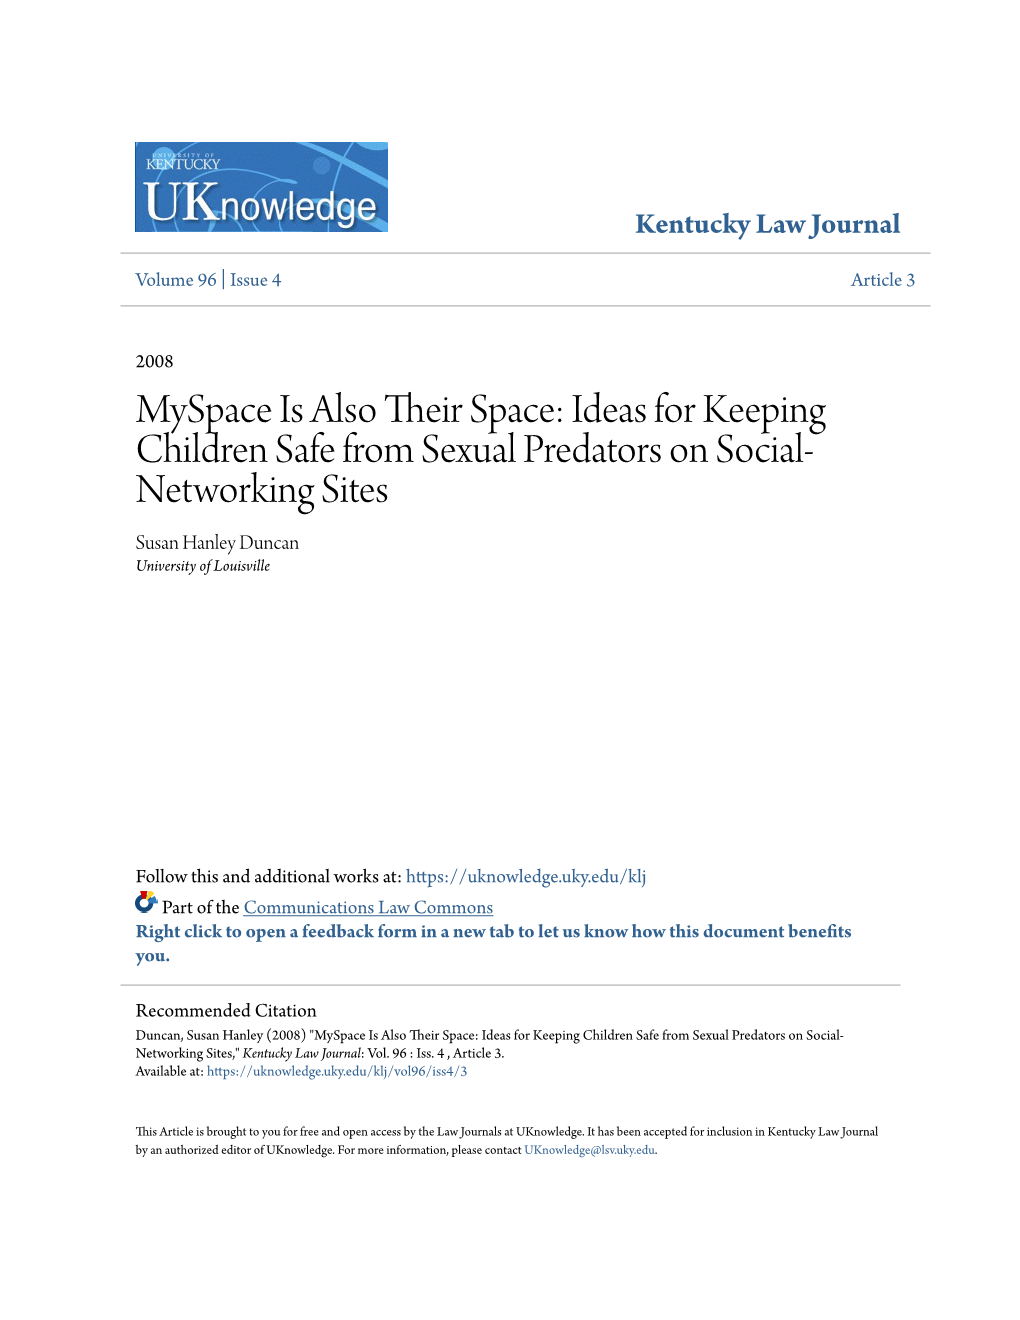 Myspace Is Also Their Space: Ideas for Keeping Children Safe from Sexual Predators on Social-Networking Sites